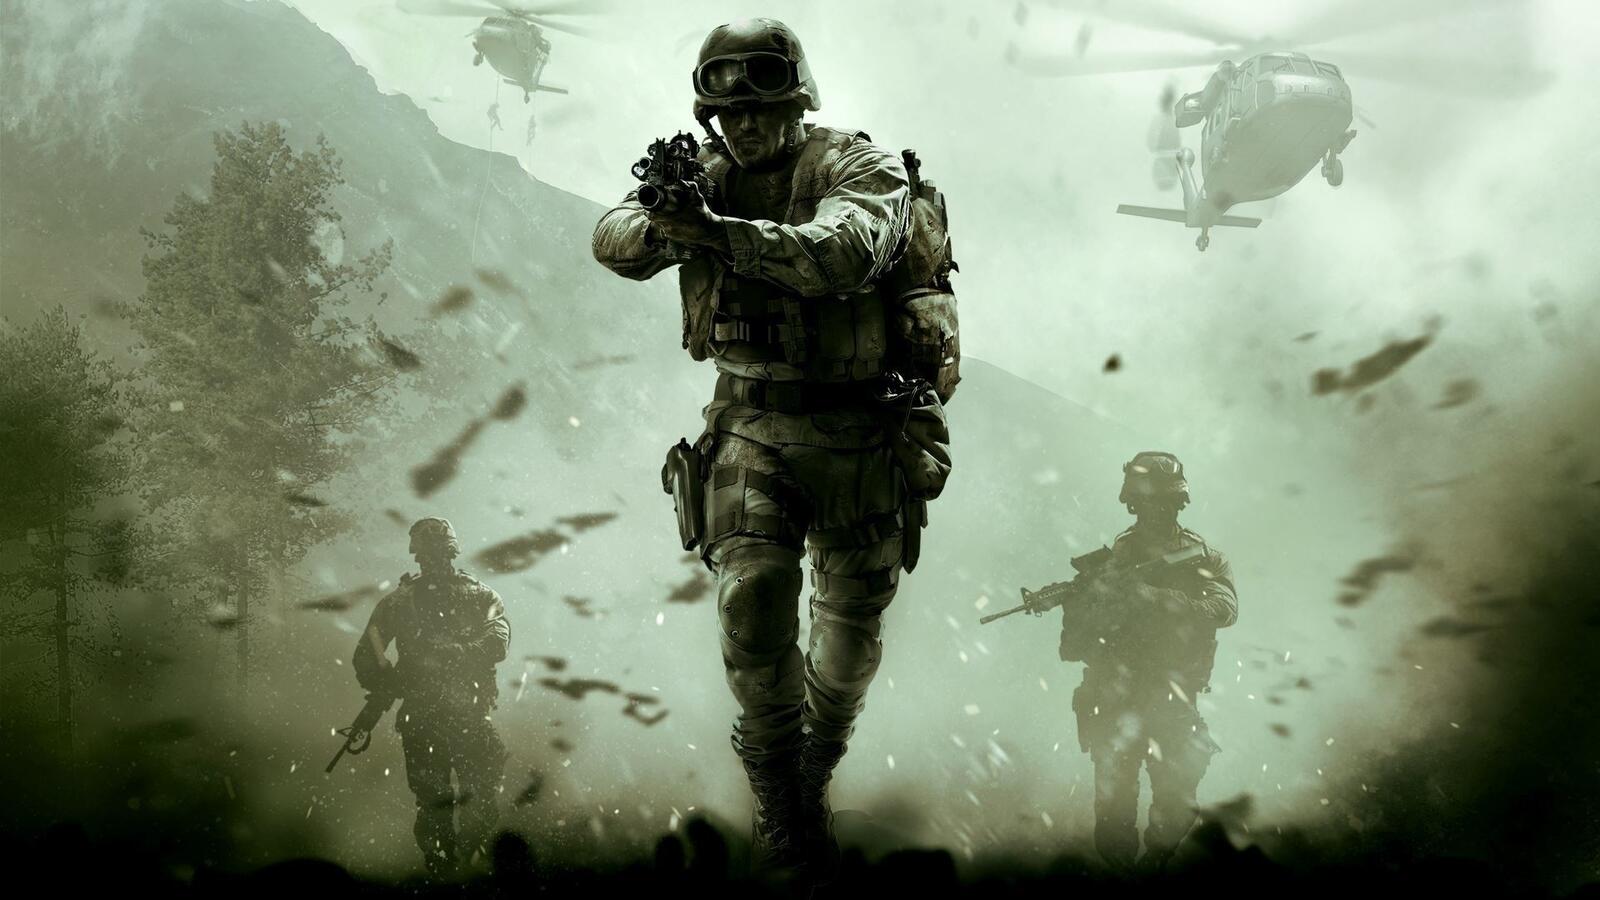 Free photo Cool picture from the game Call of Duty Modern Warfare